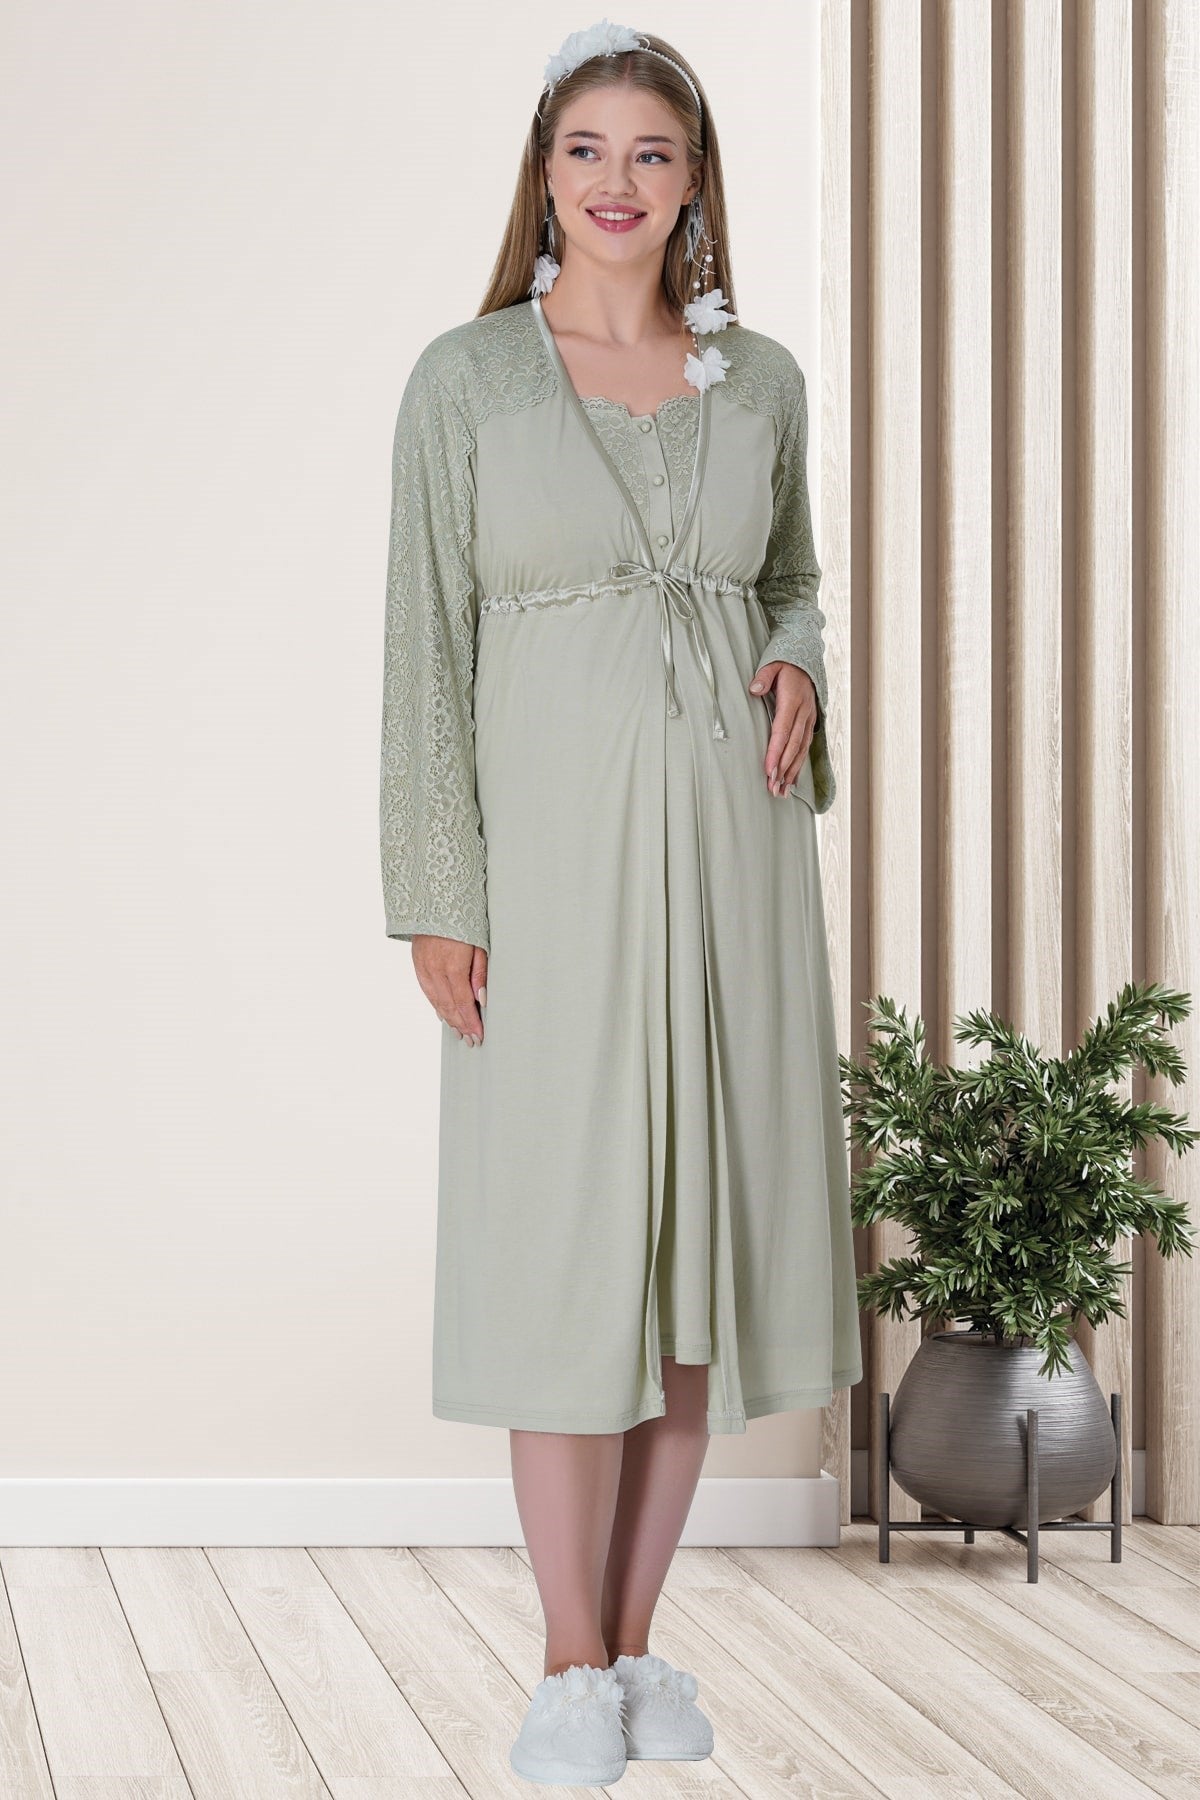 Shopymommy 5718 Lace Embroidered 4 Pieces Maternity & Nursing Set Green